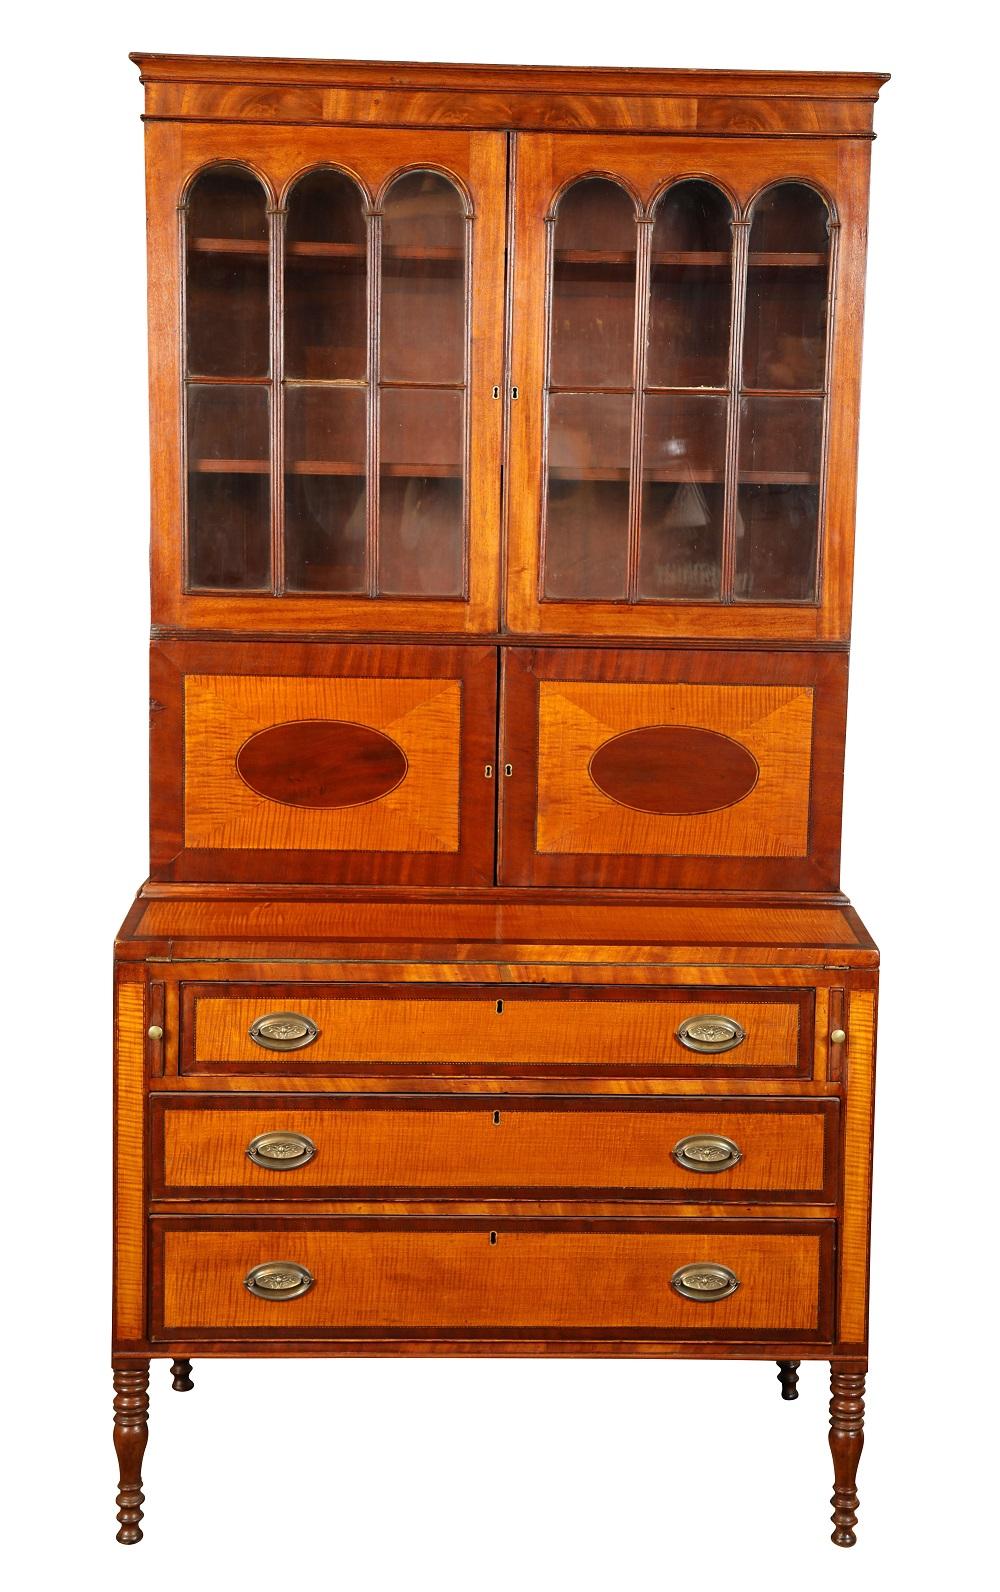 Early 19th Century American Sheraton 2 Part Secretary of Mahogany & Tiger Maple In Good Condition For Sale In Stamford, CT